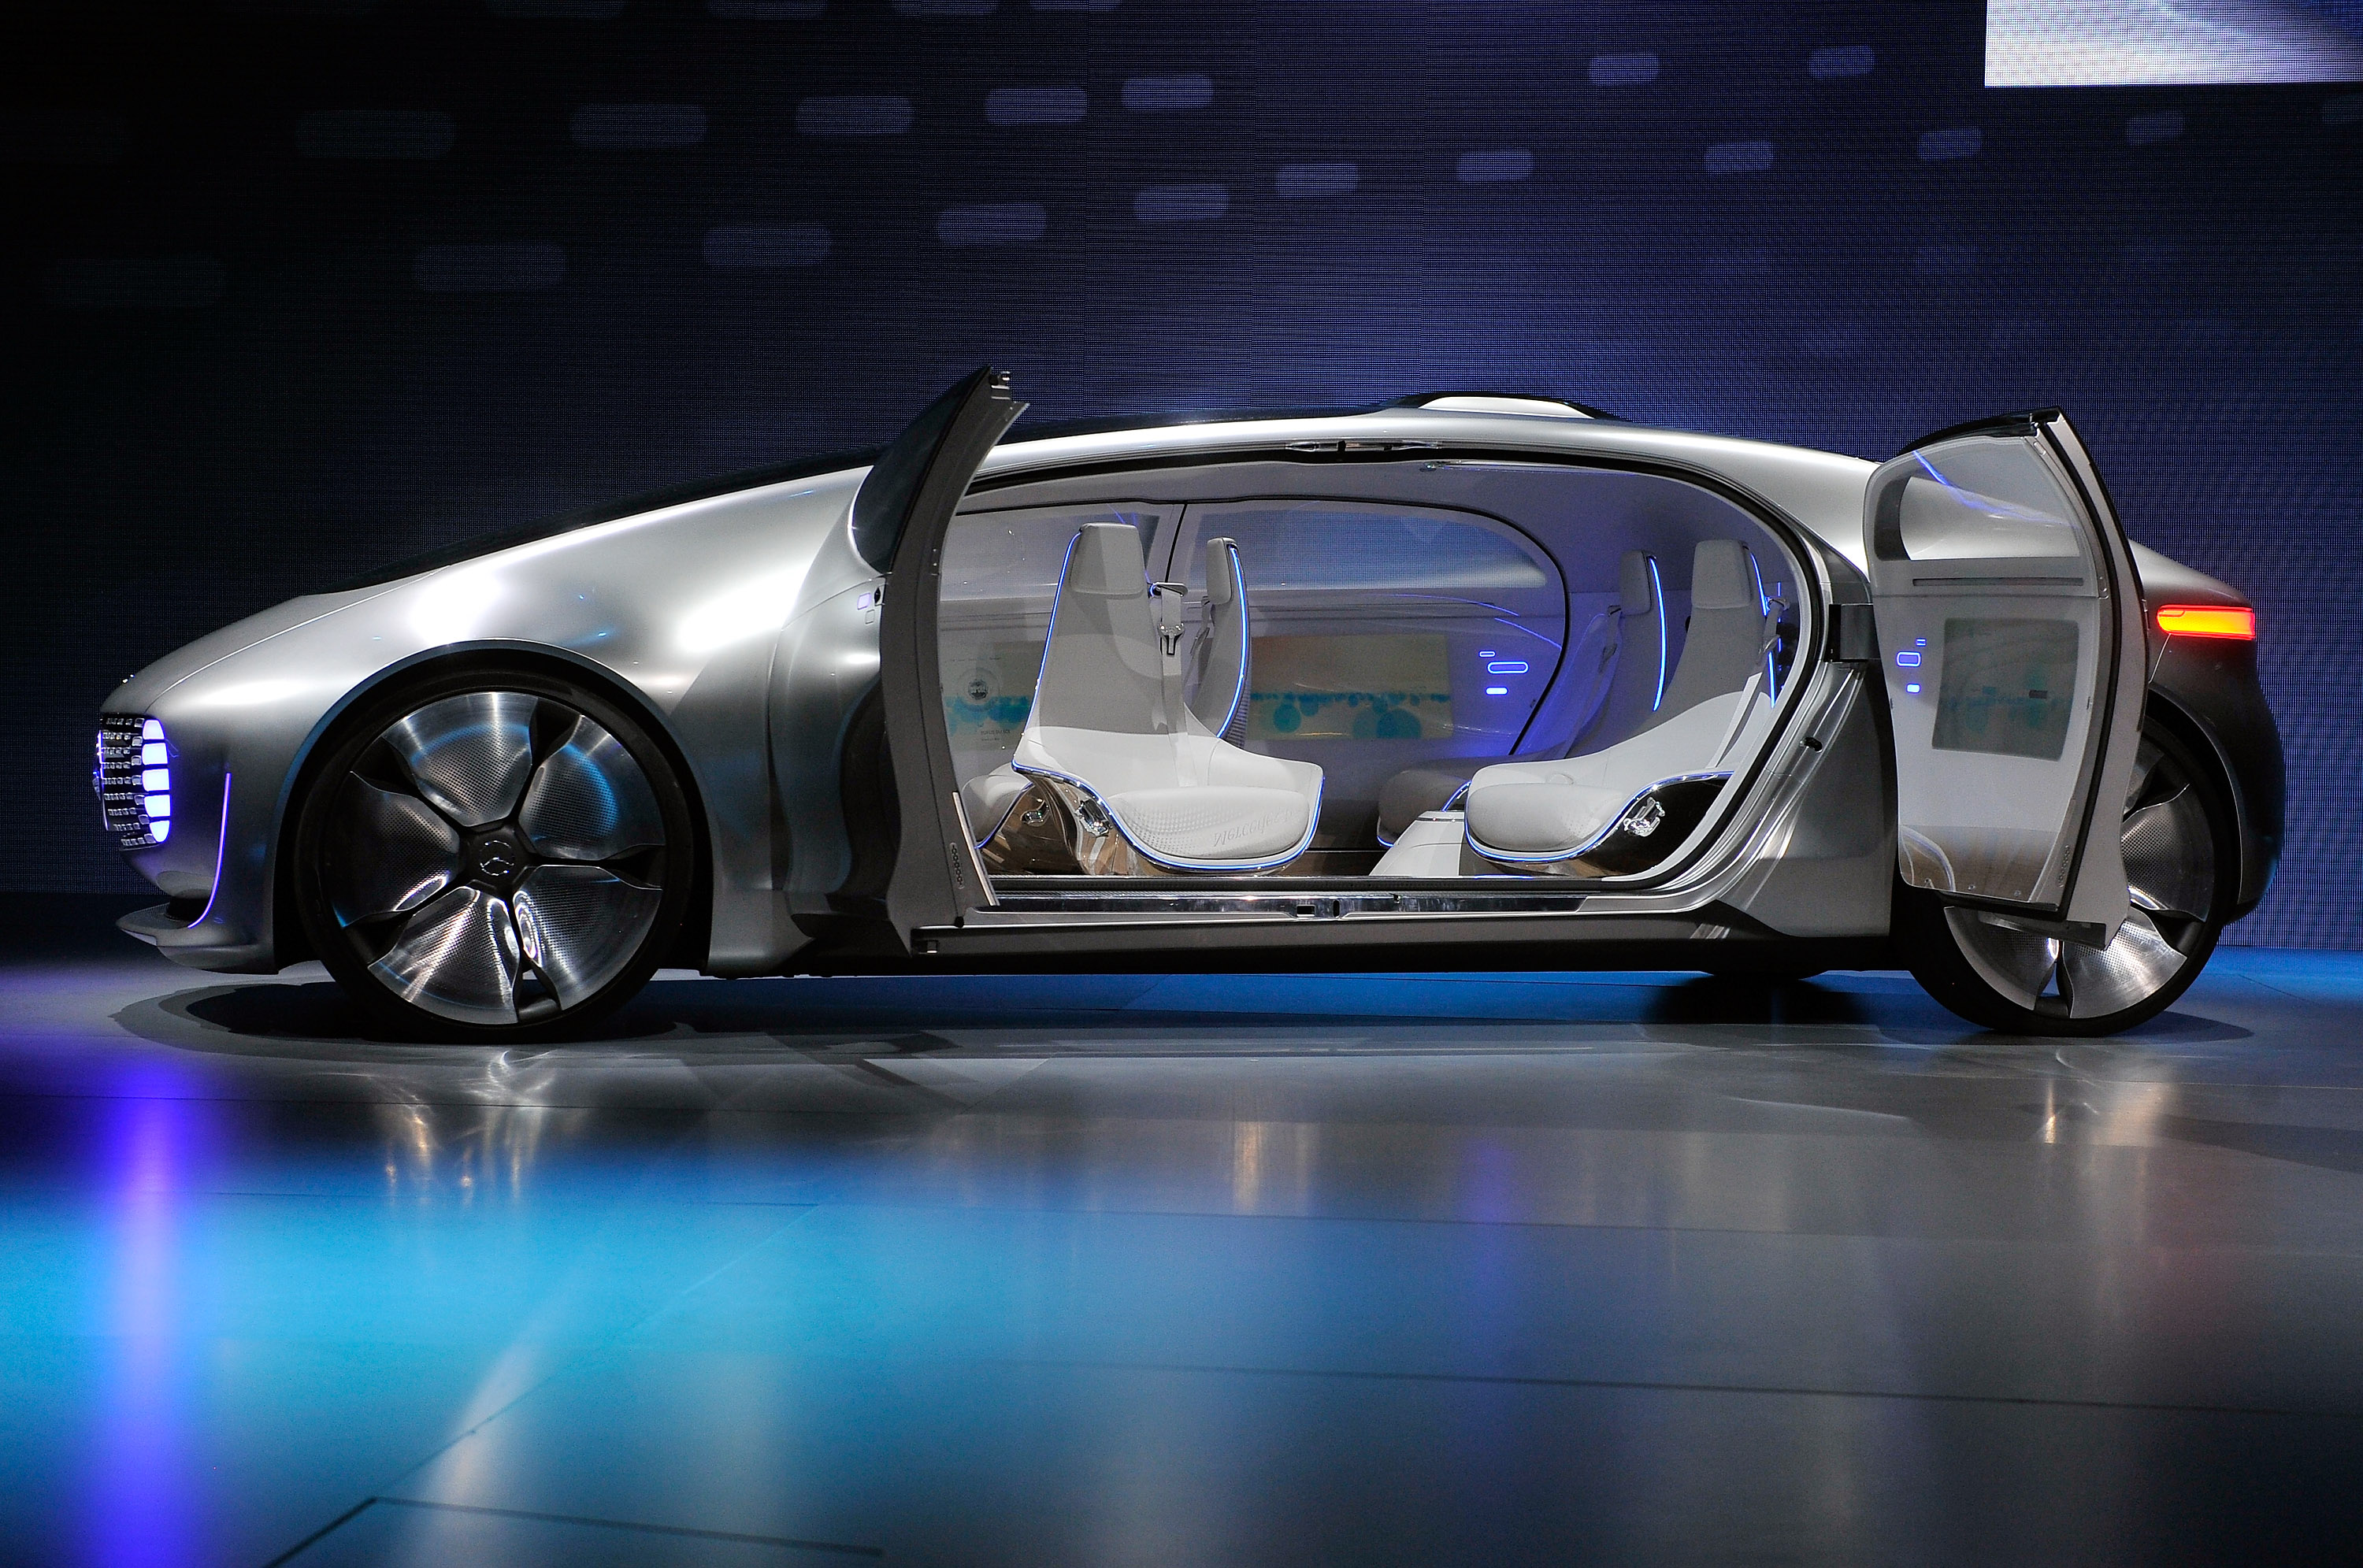 A Mercedes-Benz  F 015 autonomous driving automobile is displayed at the Mercedes-Benz press event at The Chelsea at The Cosmopolitan of Las Vegas for the 2015 International CES on January 5, 2015 in Las Vegas, Nevada. attendees.  (Photo by David Becker/Getty Images) (David Becker—Getty Images)